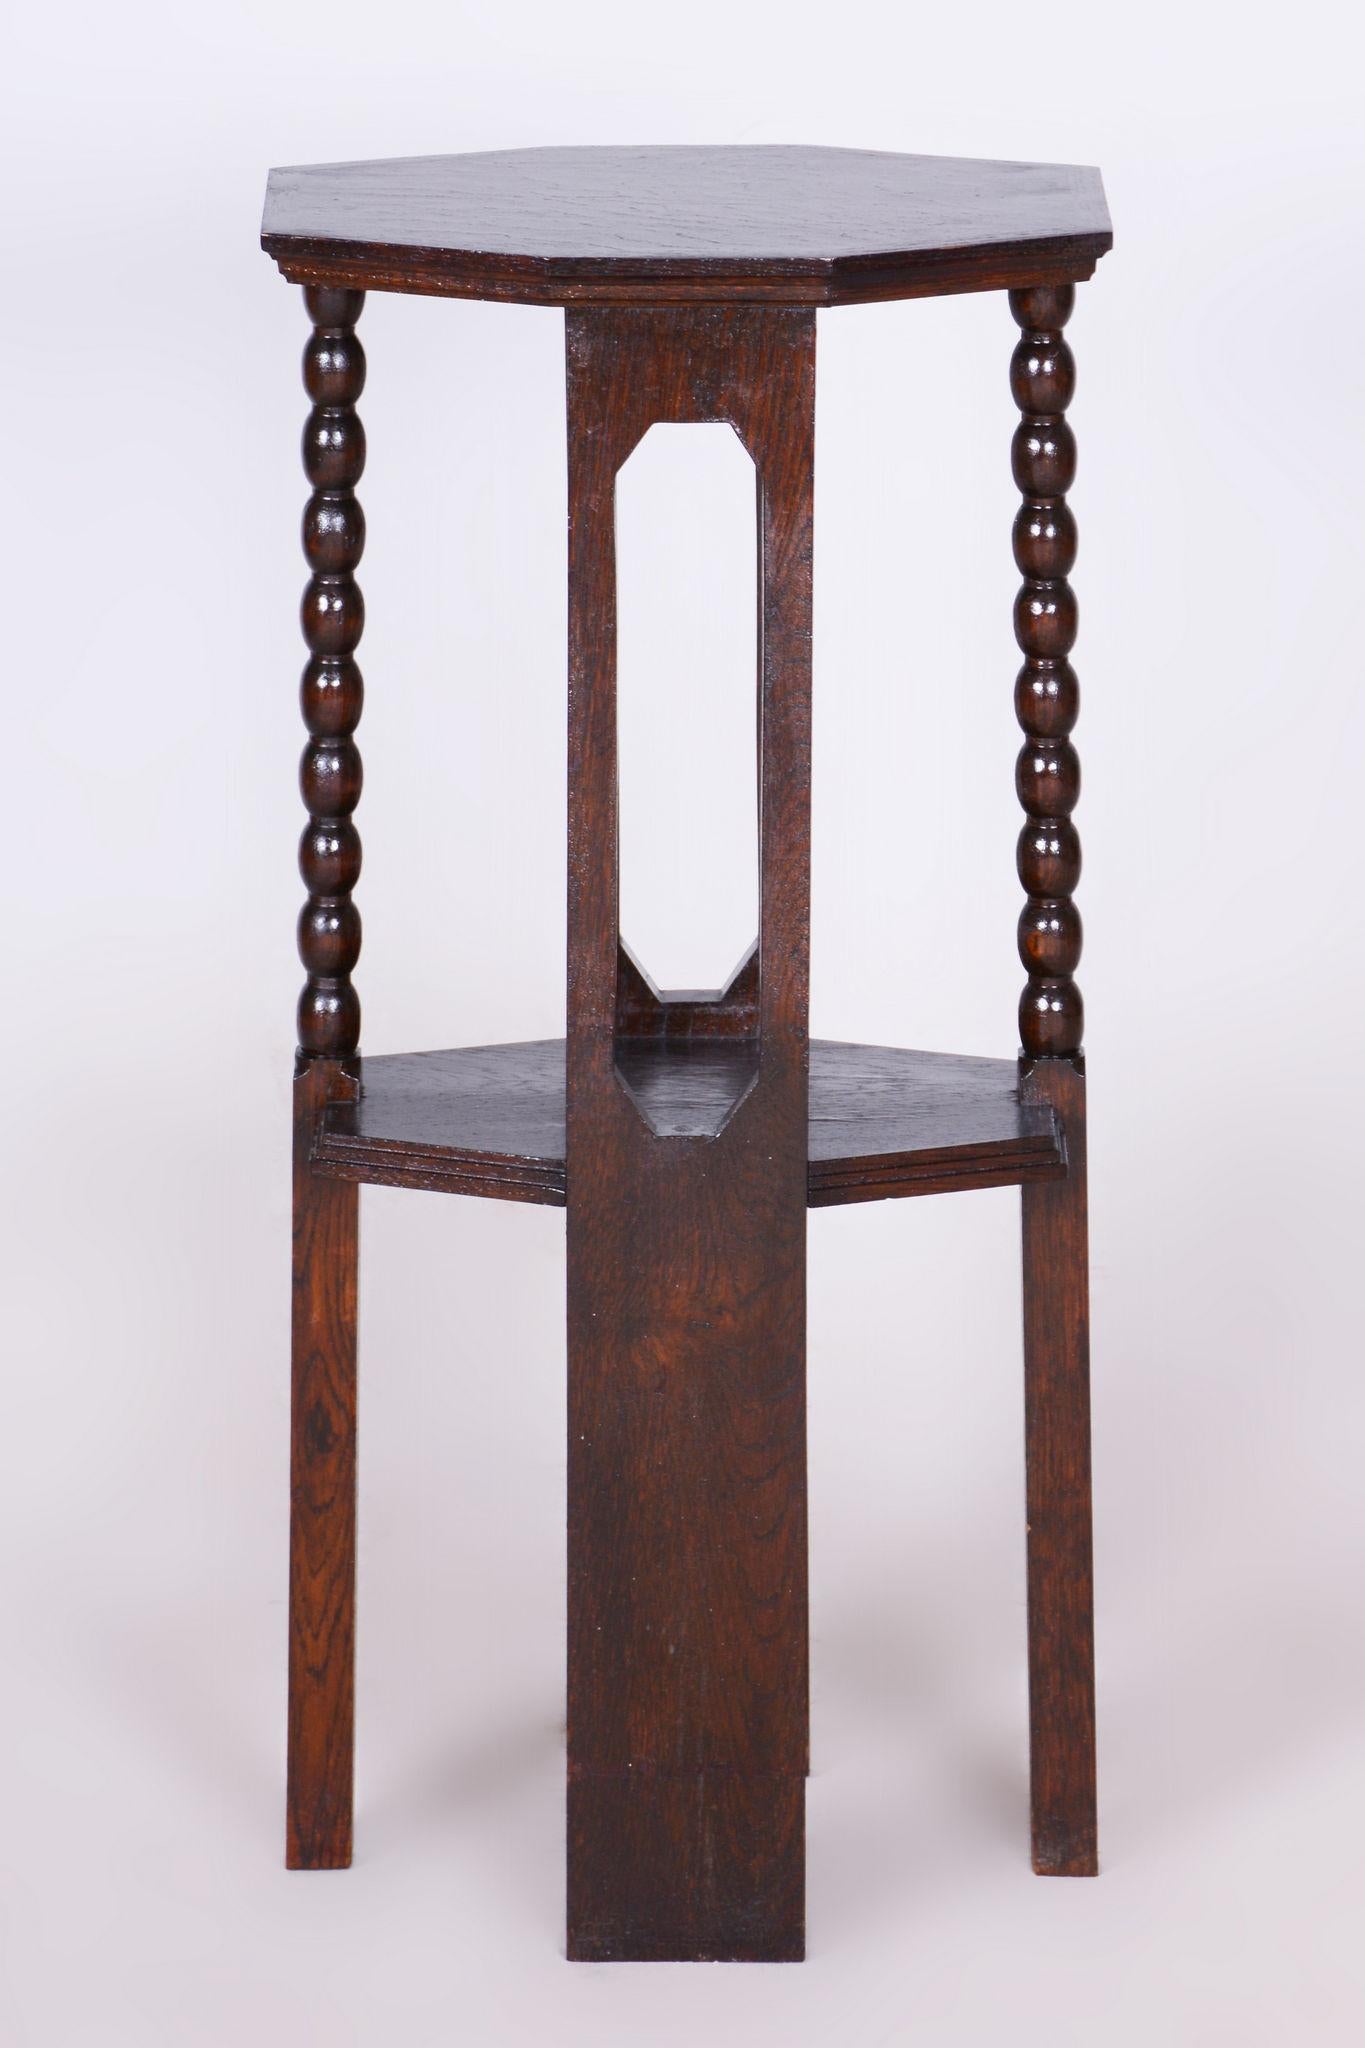 Restored Art Deco Oak Pedestal

Source: Austria
Period: 1920-1929
Material: Solid oak wood 

Made by Wiener Werkstätte Arts and crafts workshops, founded by Josef Hoffmann, Koloman Moser and Fritz Waerndorfer. They operated between 1903 and 1932.